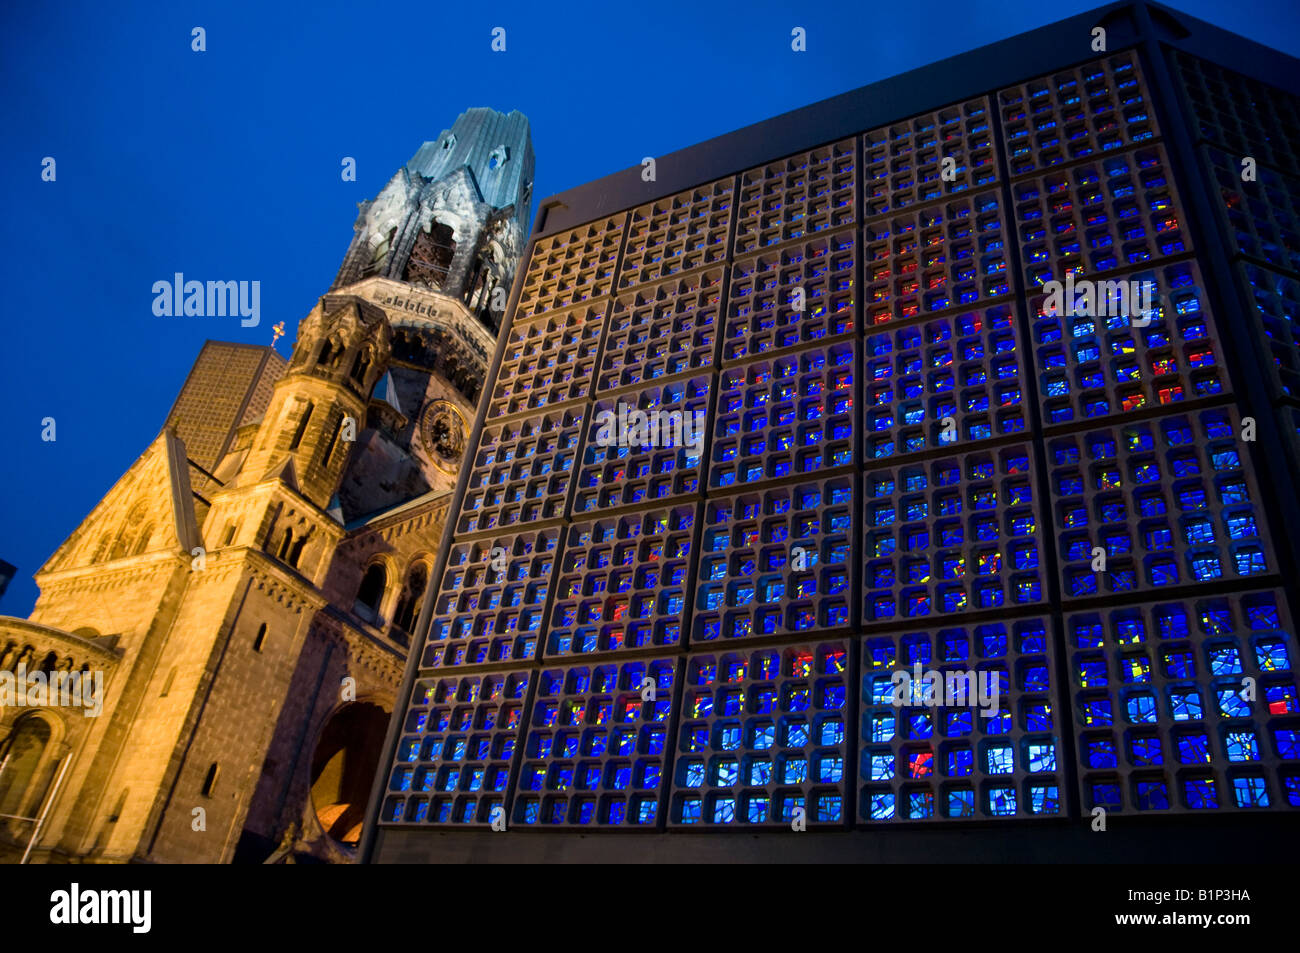 Kaiser Wilhelm gedächtniskirche church with the new church designed by Eiermann with stained glass inlays designed by Gabriel Loire in Berlin Germany Stock Photo